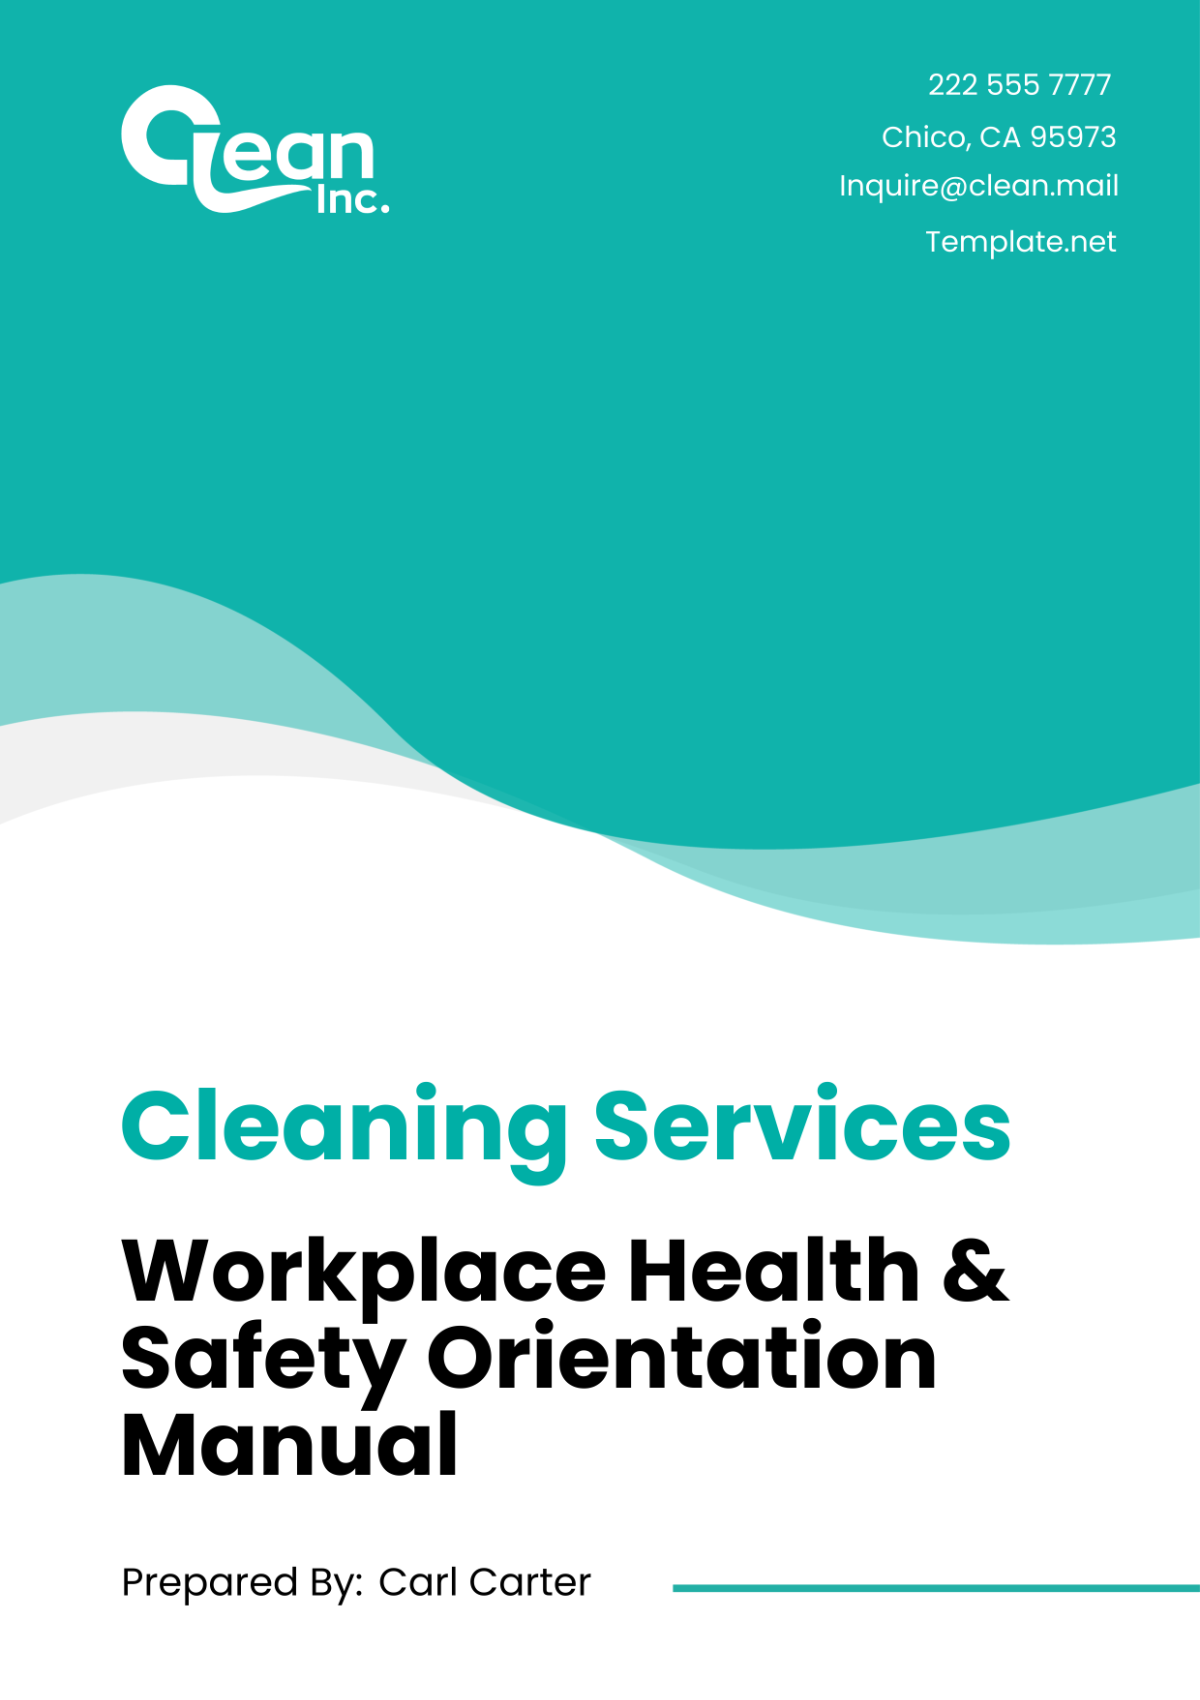 Free Cleaning Services Workplace Health & Safety Orientation Manual Template